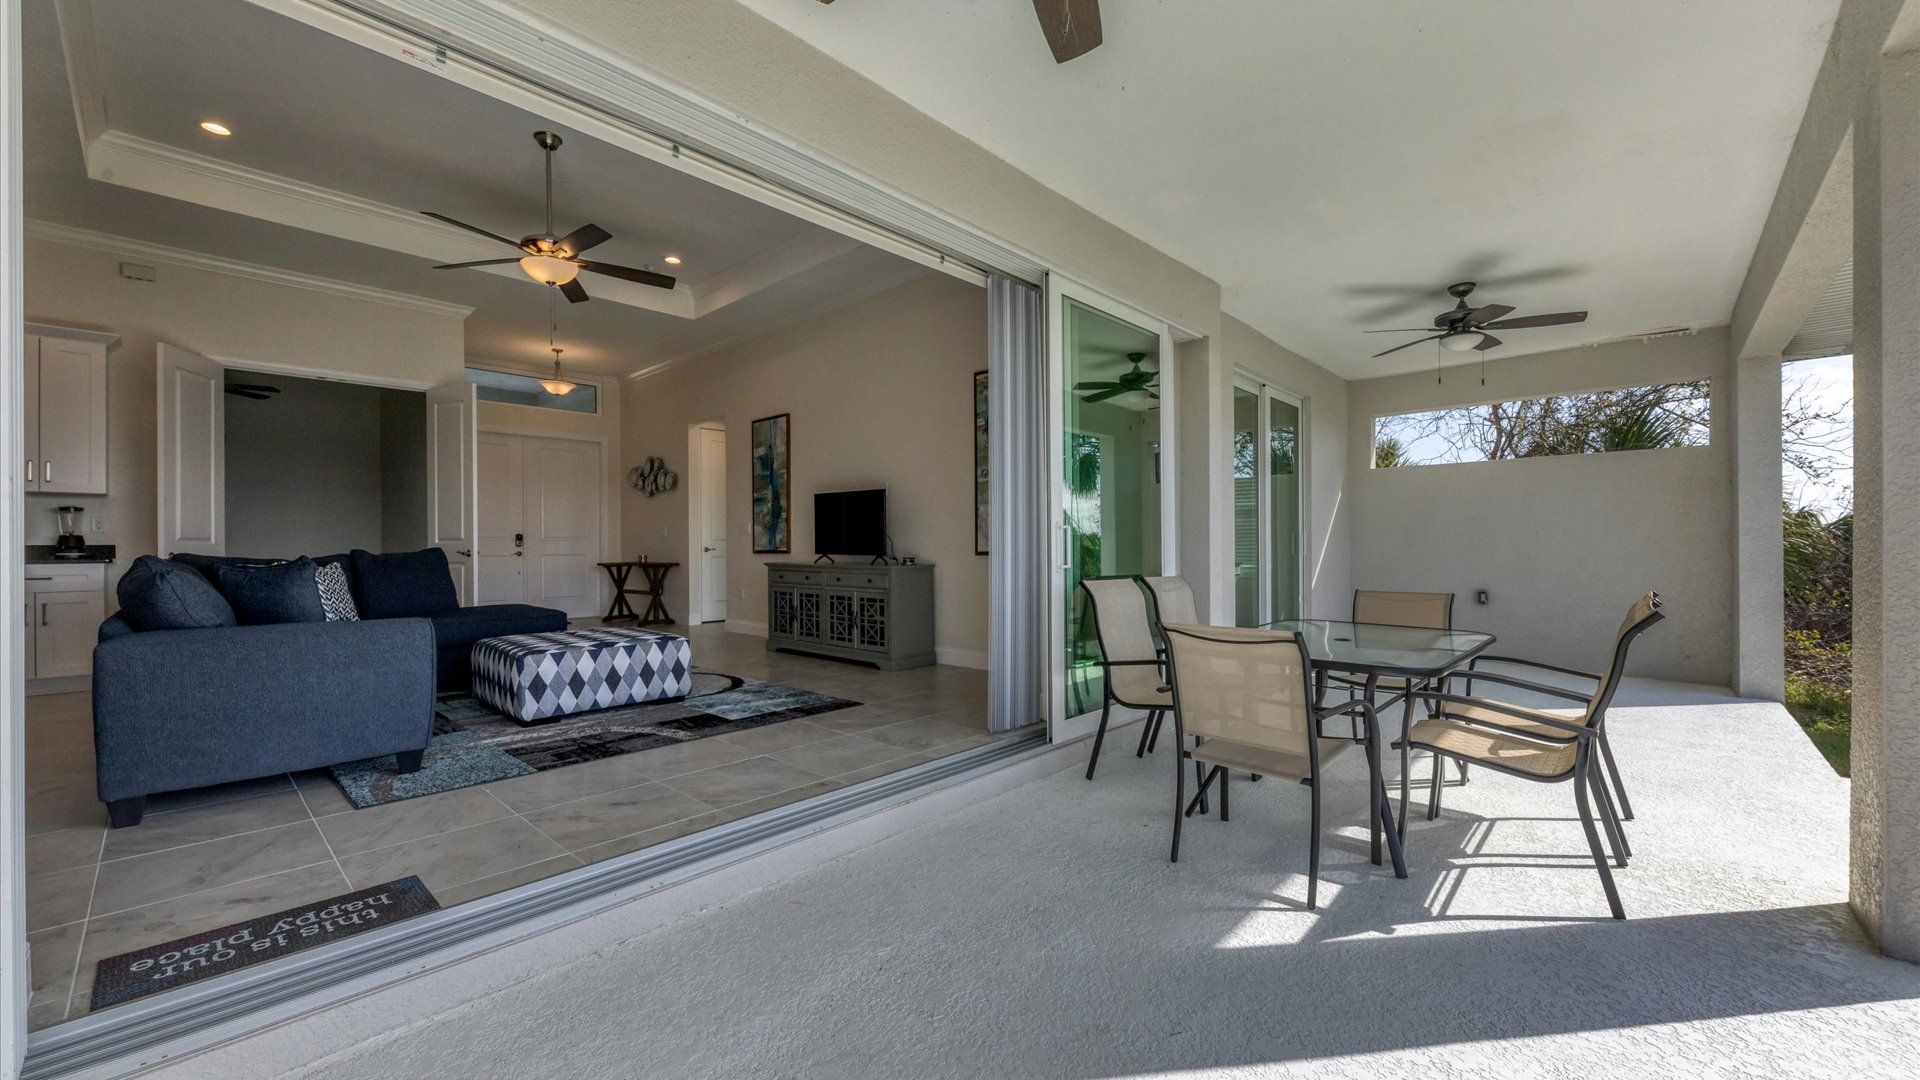 Enjoy inside/outside life in Florida- this space is now screened in